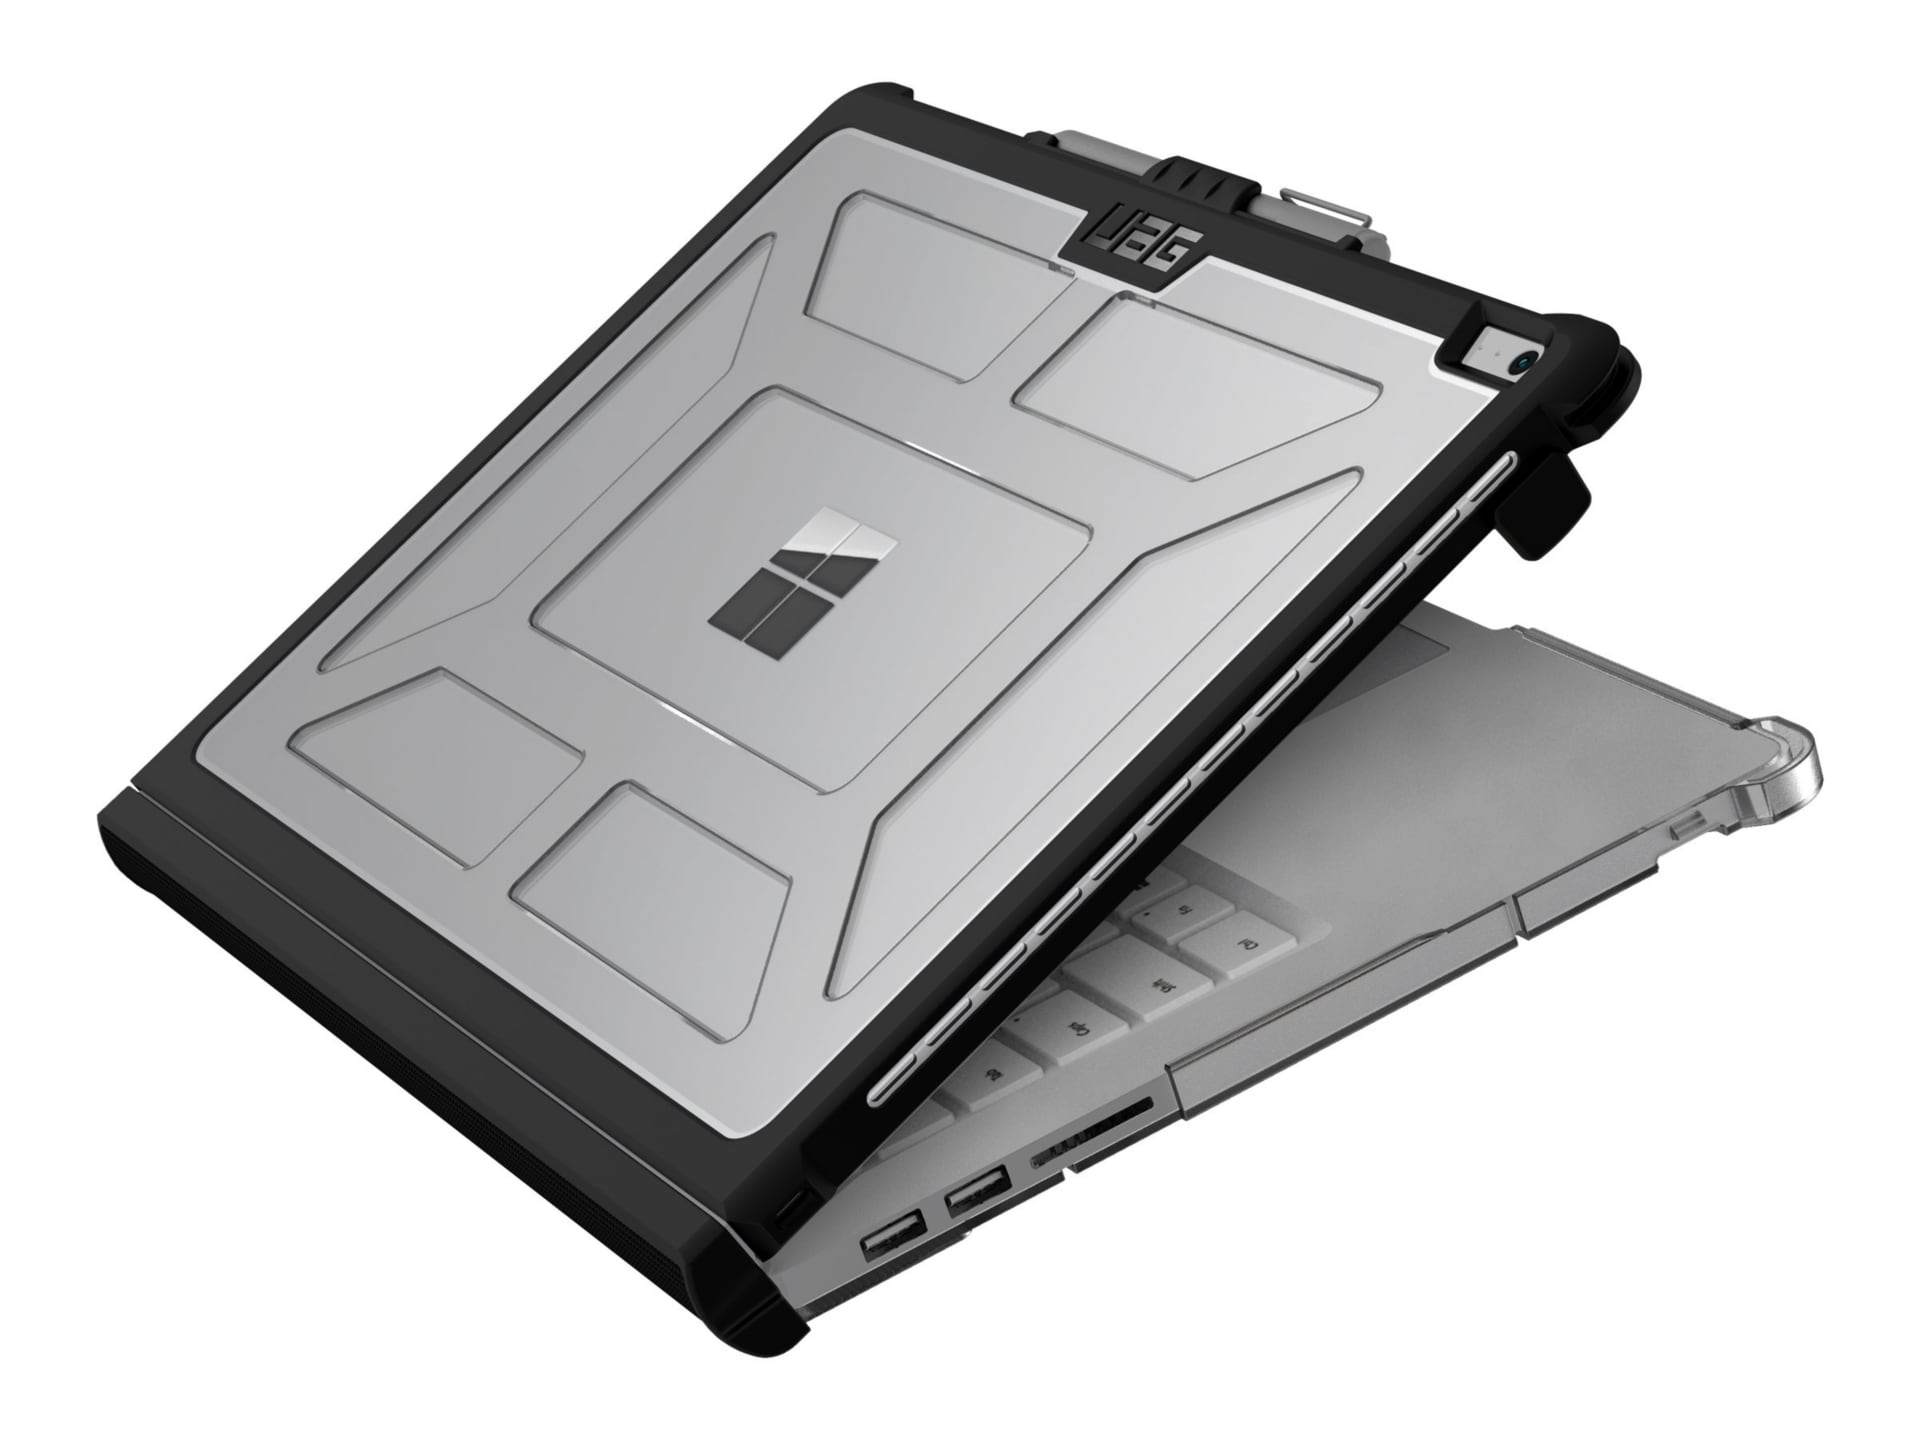 UAG Rugged Case for Surface Book (3,2,1) and Performance Base 13.5 inch